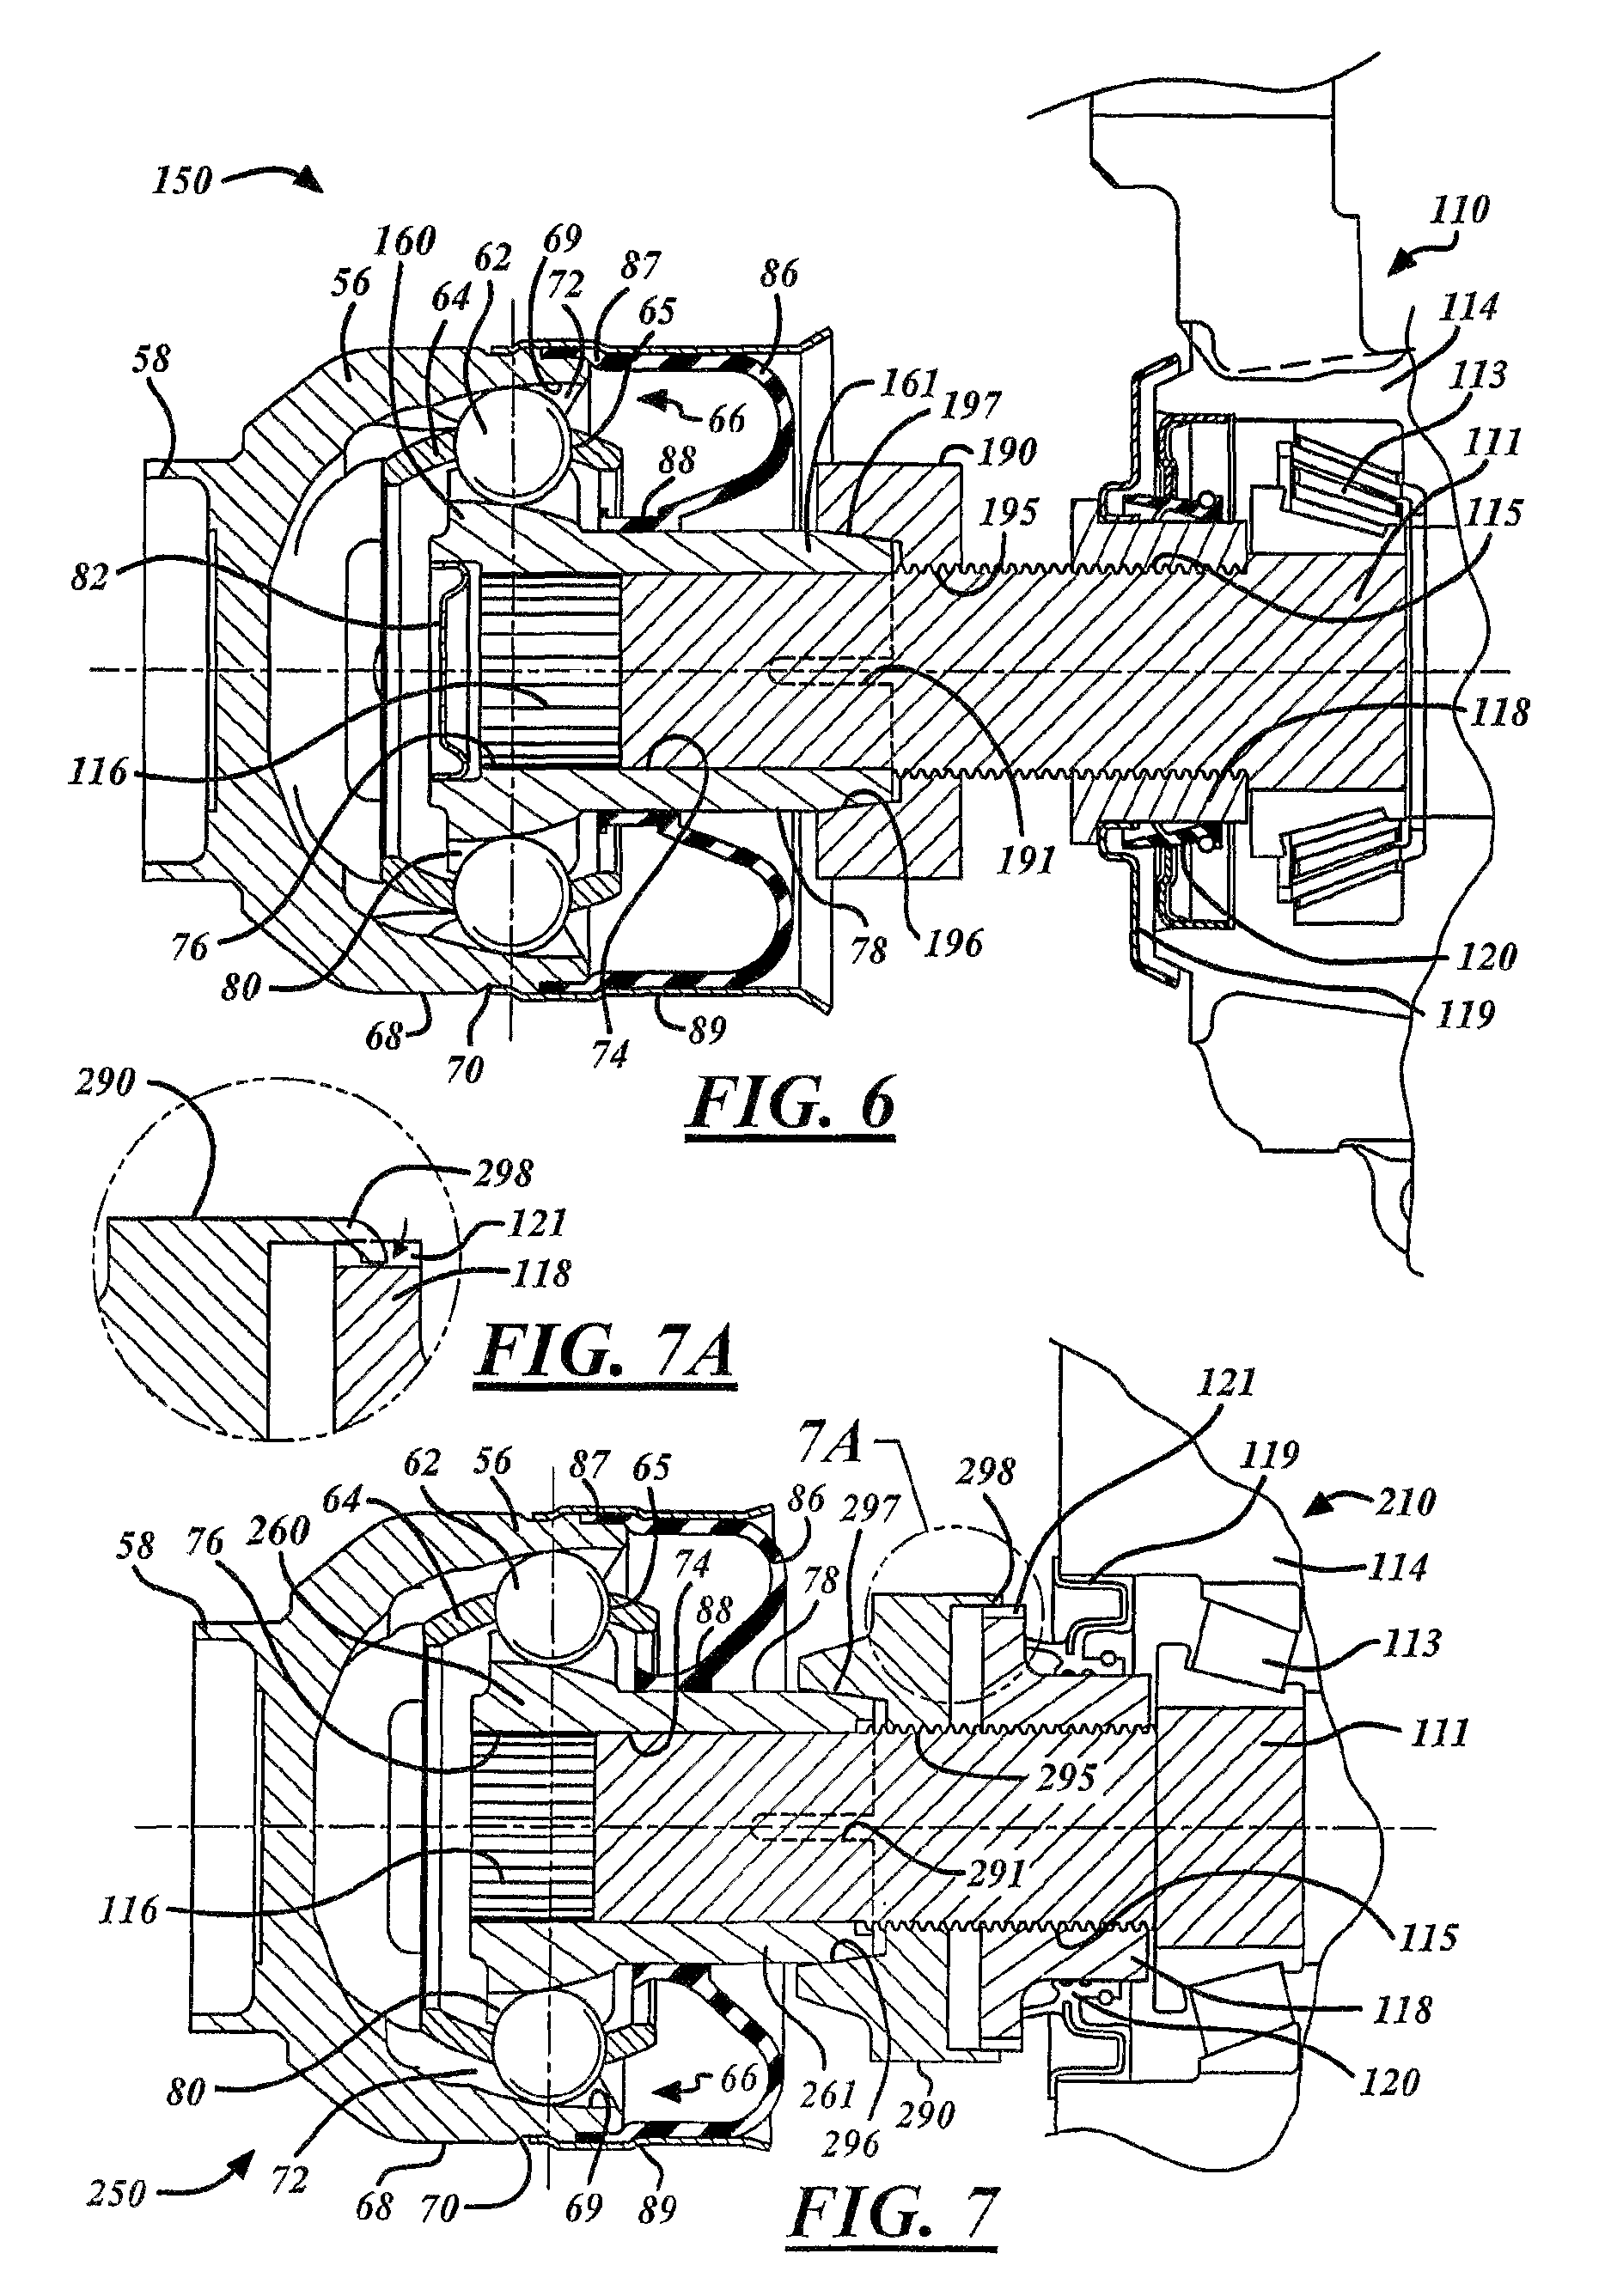 Direct torque flow constant velocity joint having collet connection